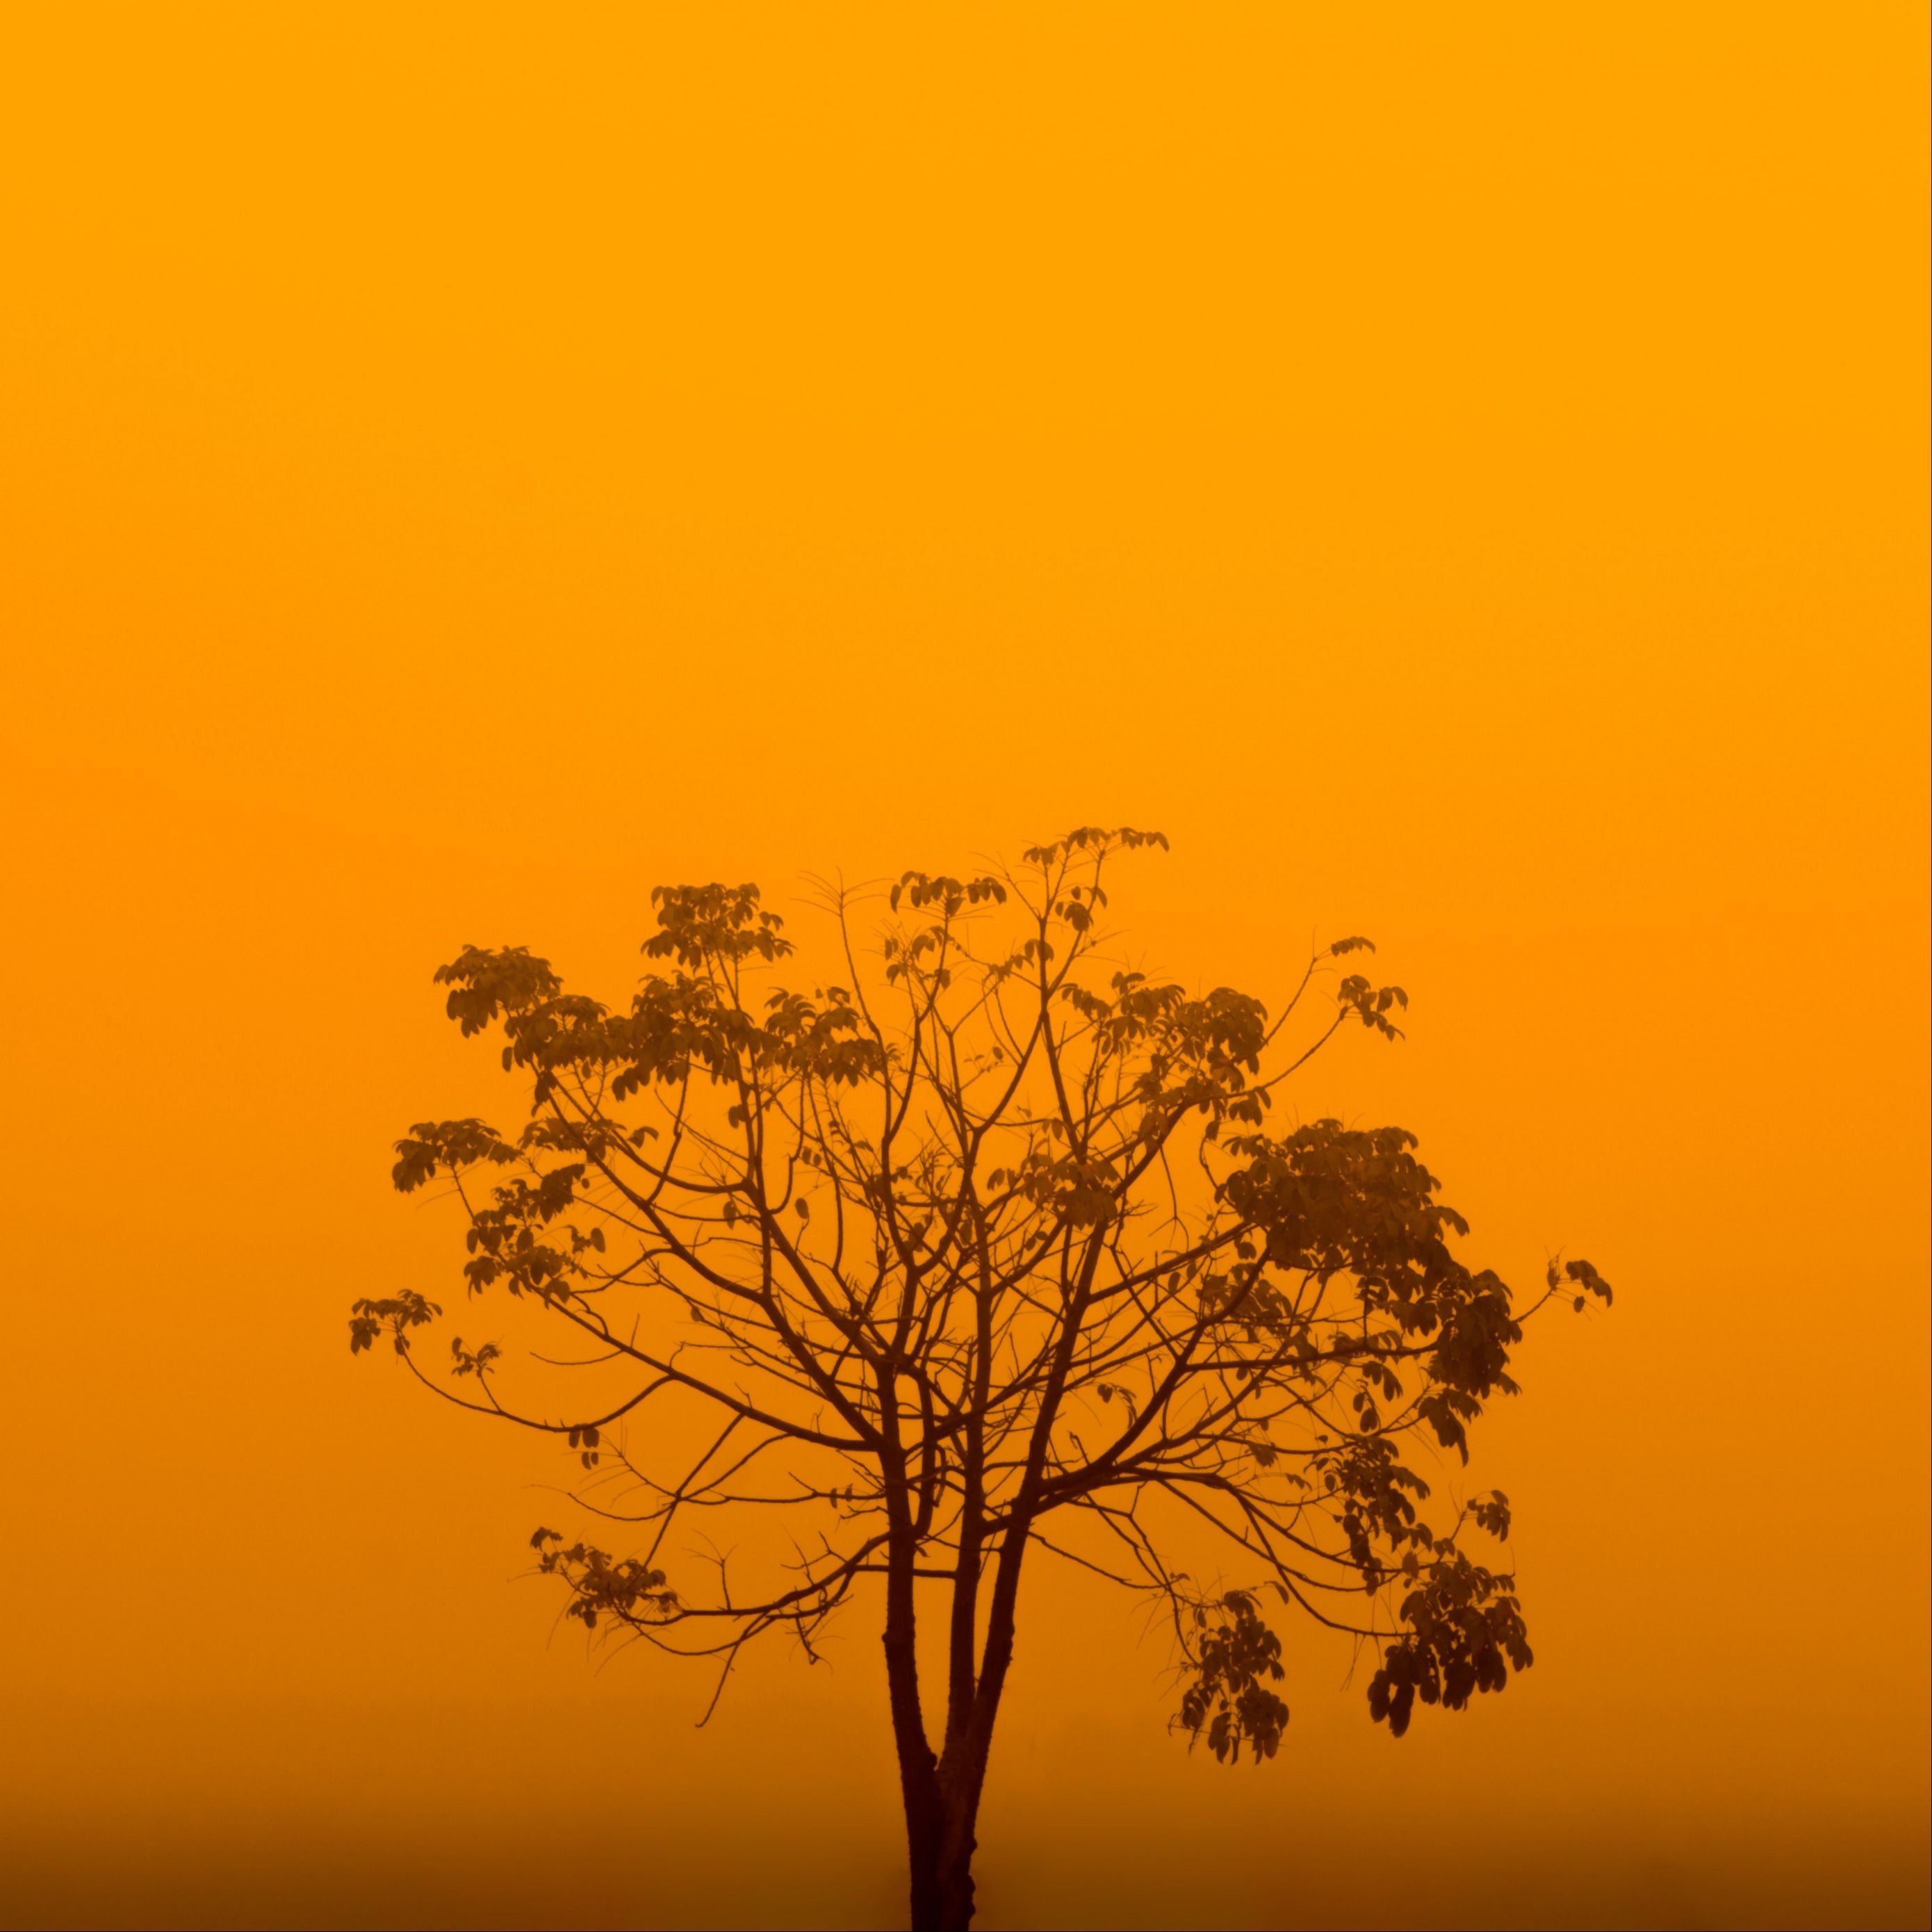 A tree is standing in the middle of an orange sky - Yellow